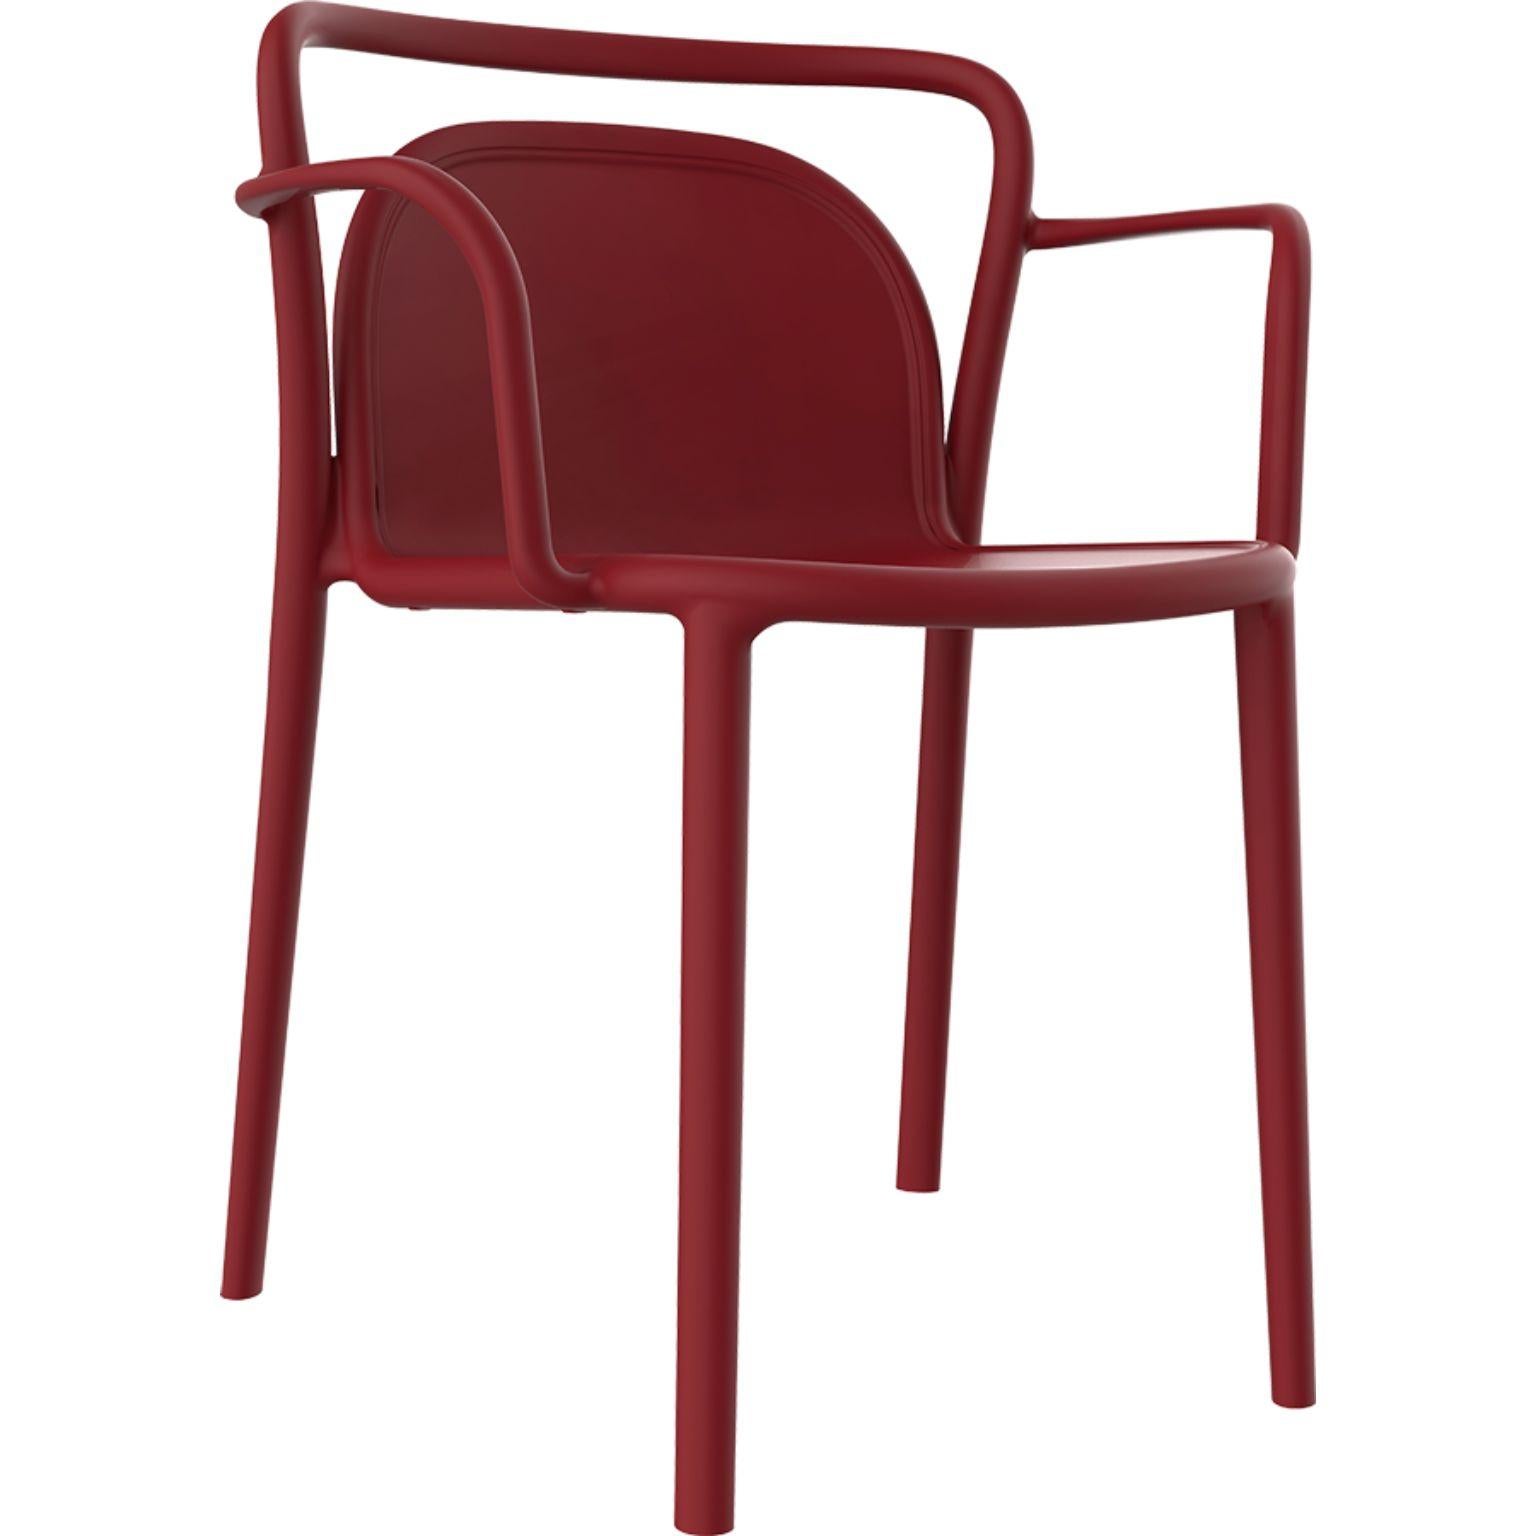 Set of 4 classe burgundy chairs by MOWEE
Dimensions: D52 x W52 x H77 cm (Seat Height 45 cm)
Material: Polypropylene resin with fiberglass.
Weight: 4.6 kg
Also available in different colors. An optional cushion can be added. 

Classe is a chair